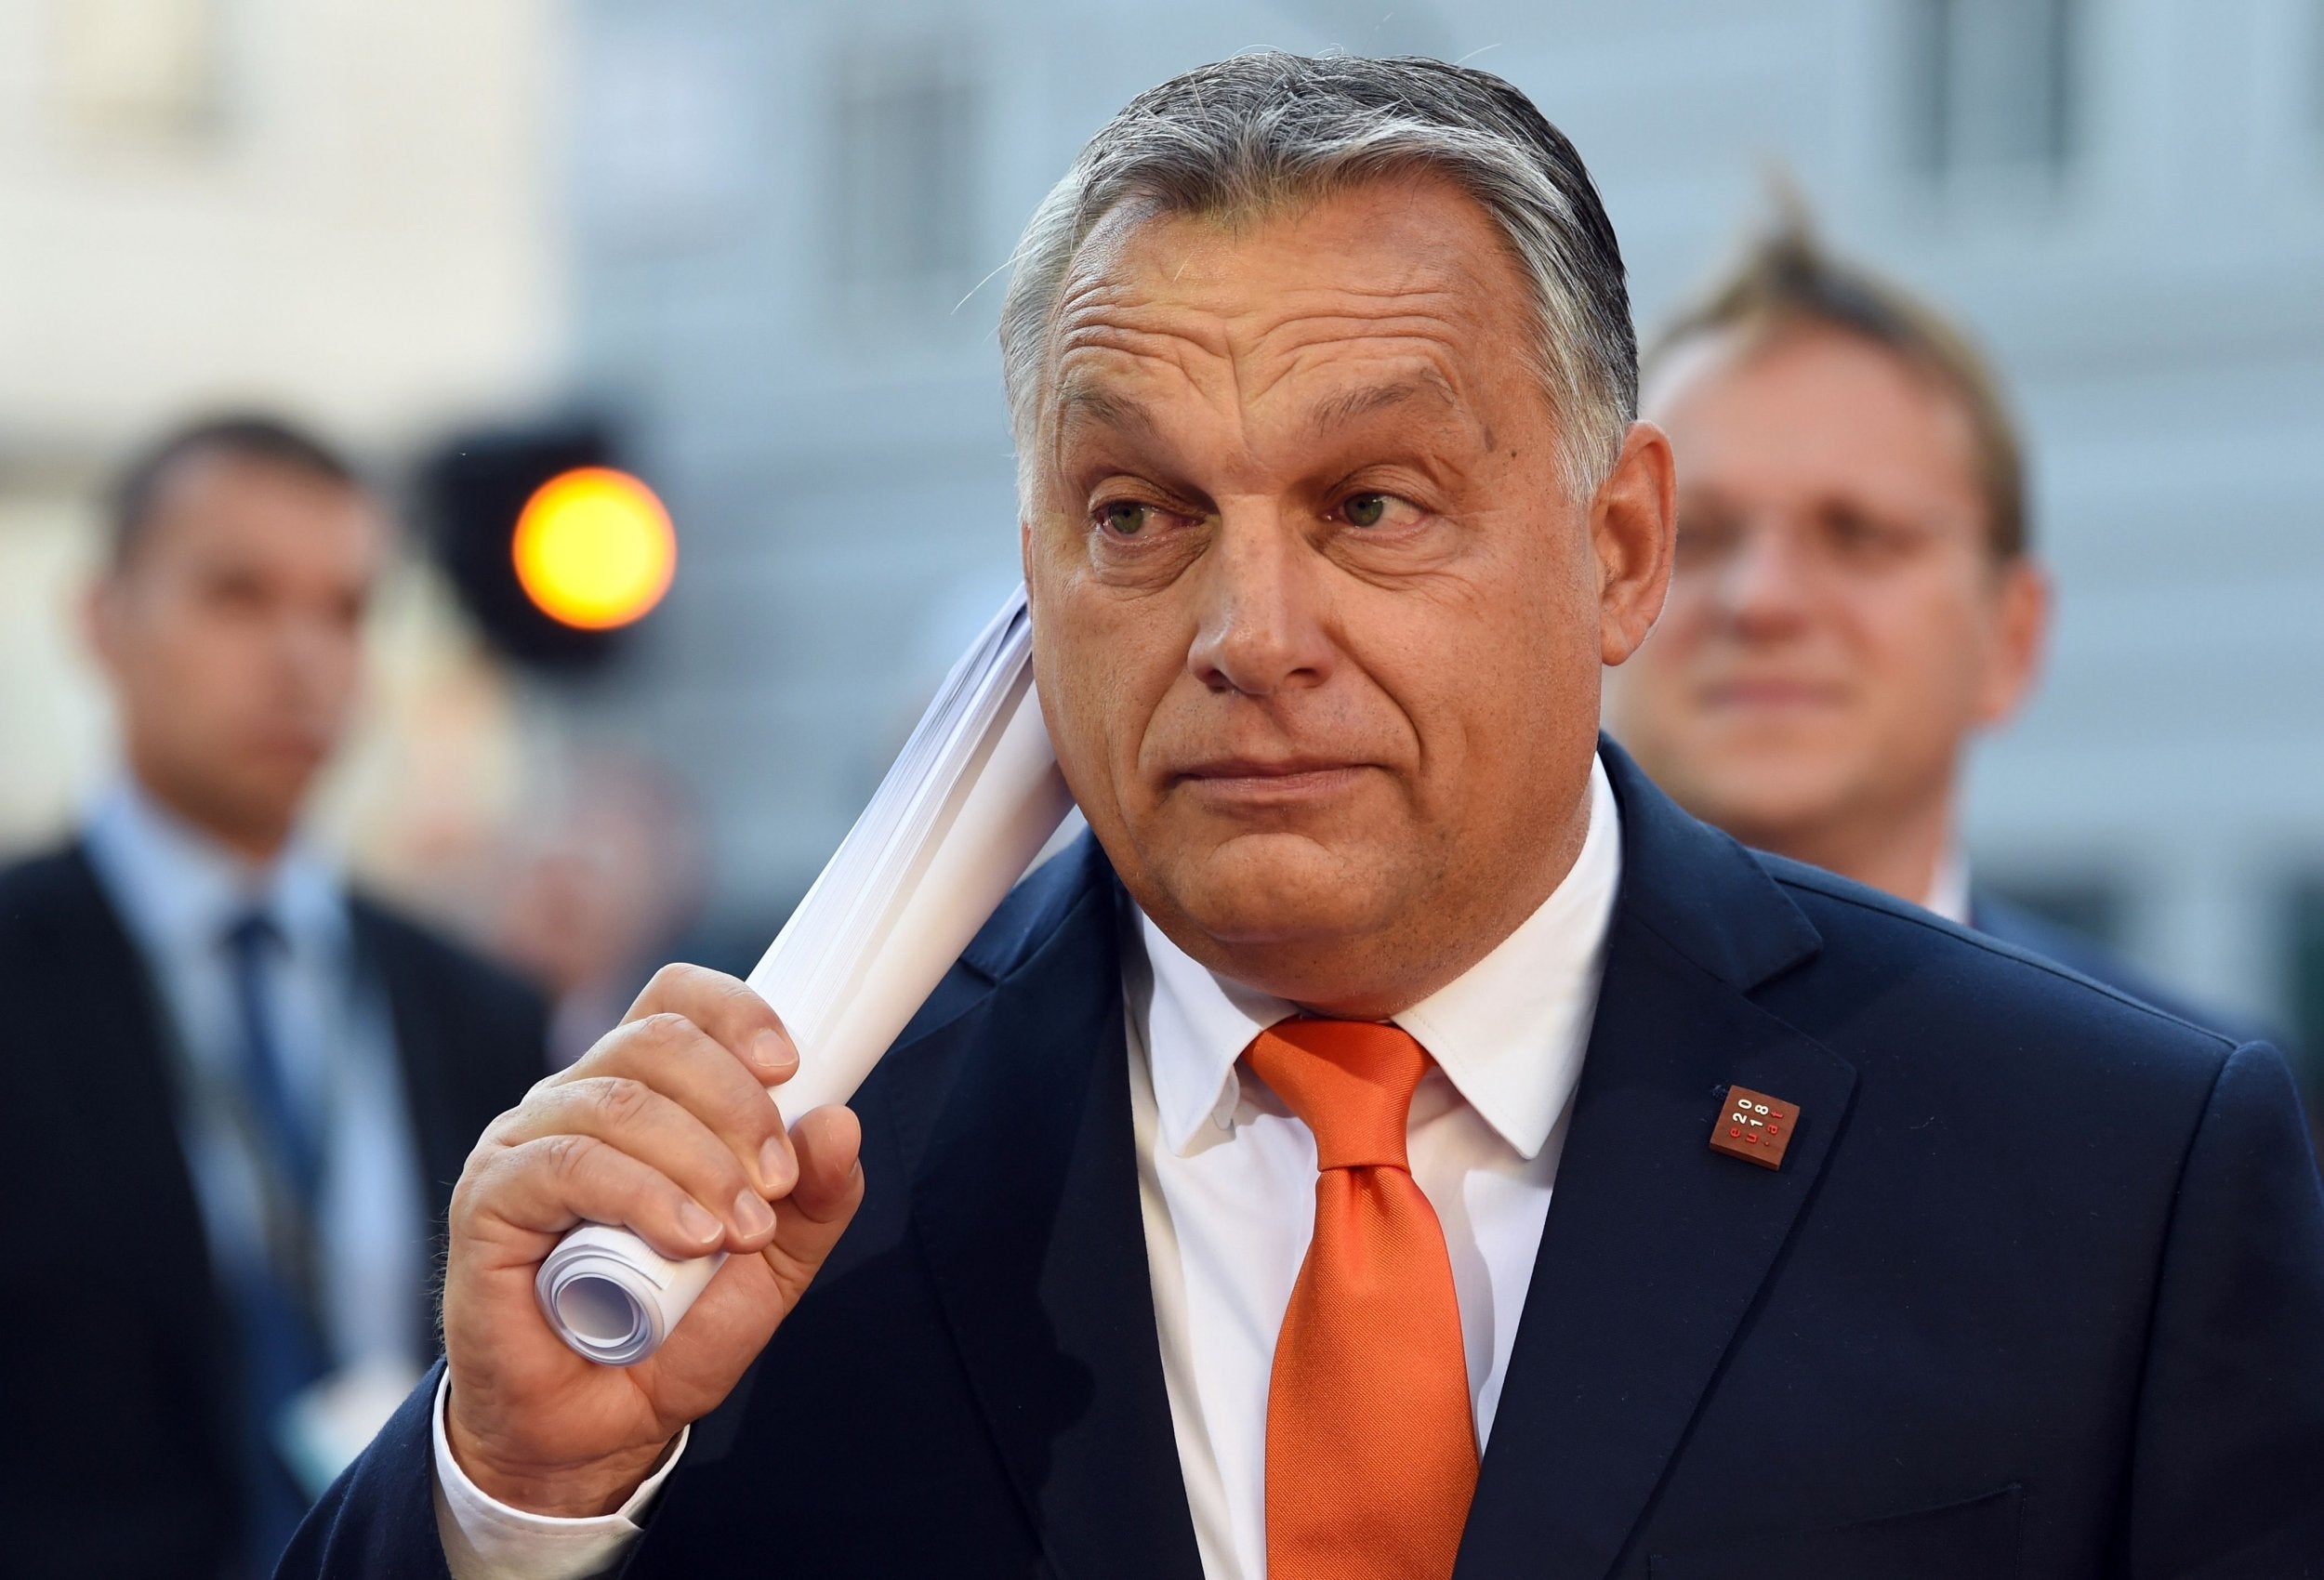 Orban is one of many figures around the world using the game for their own ends